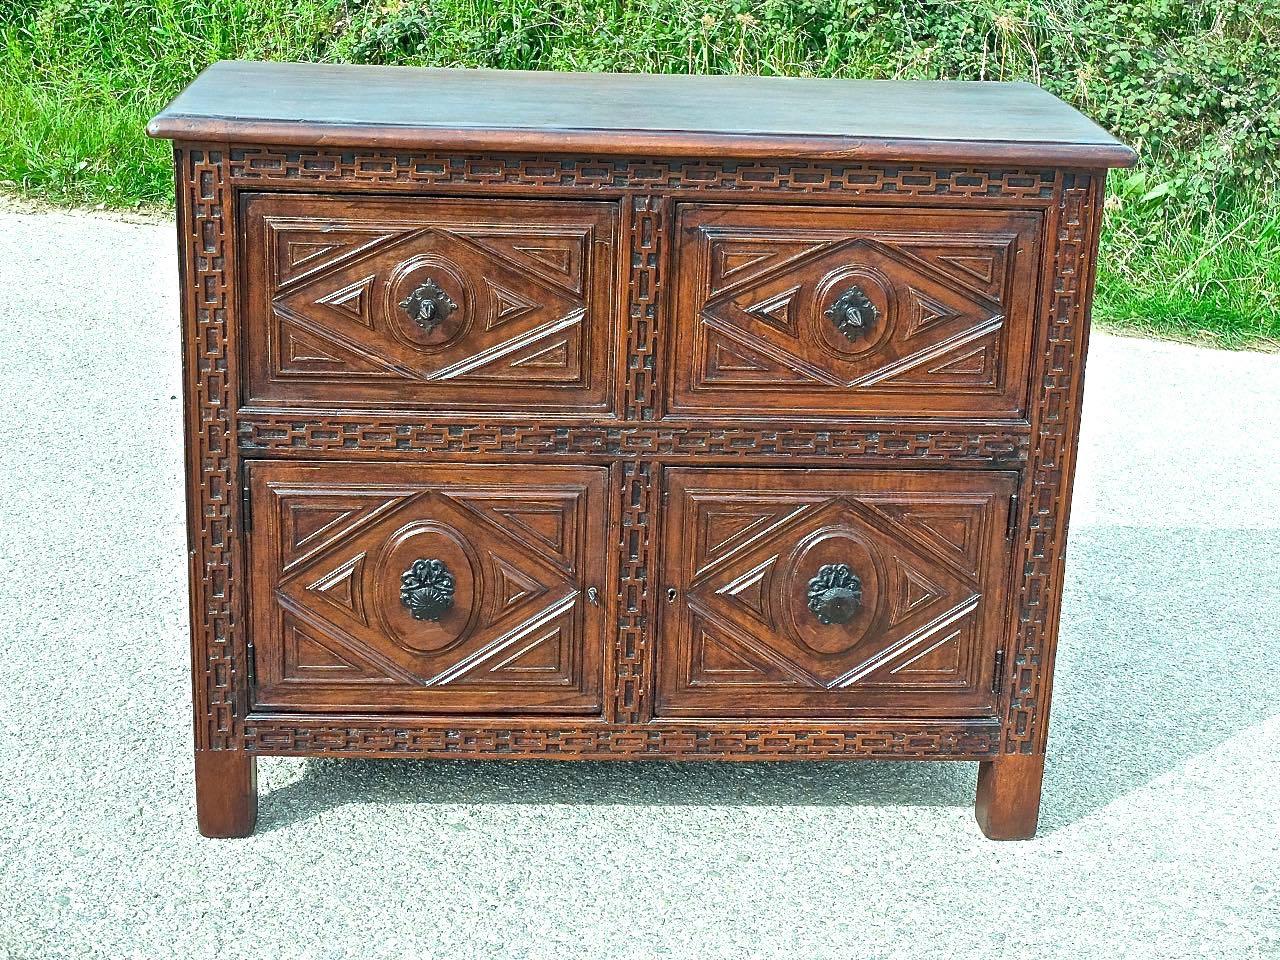 Found in the provincial capital of Burgos in Old Castile, Spain, this lovely two-drawer, two-door credenza is a perfect late 19th century replica of a classic 17th century Castilian 